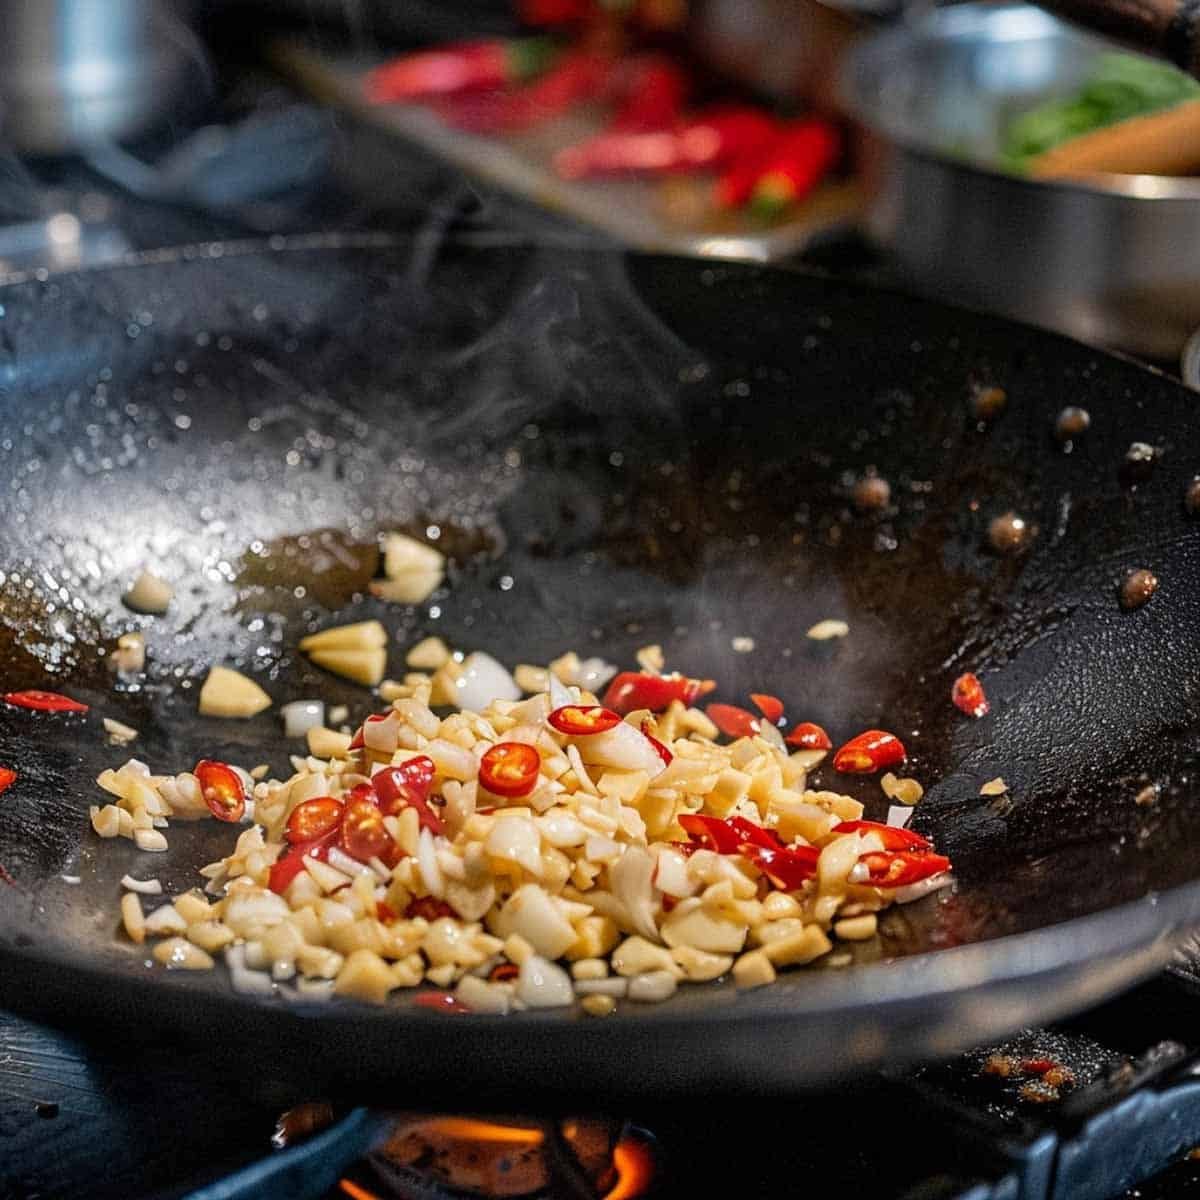 Garlic and chili cooking in a pan with hot oil, sizzling and aromatic